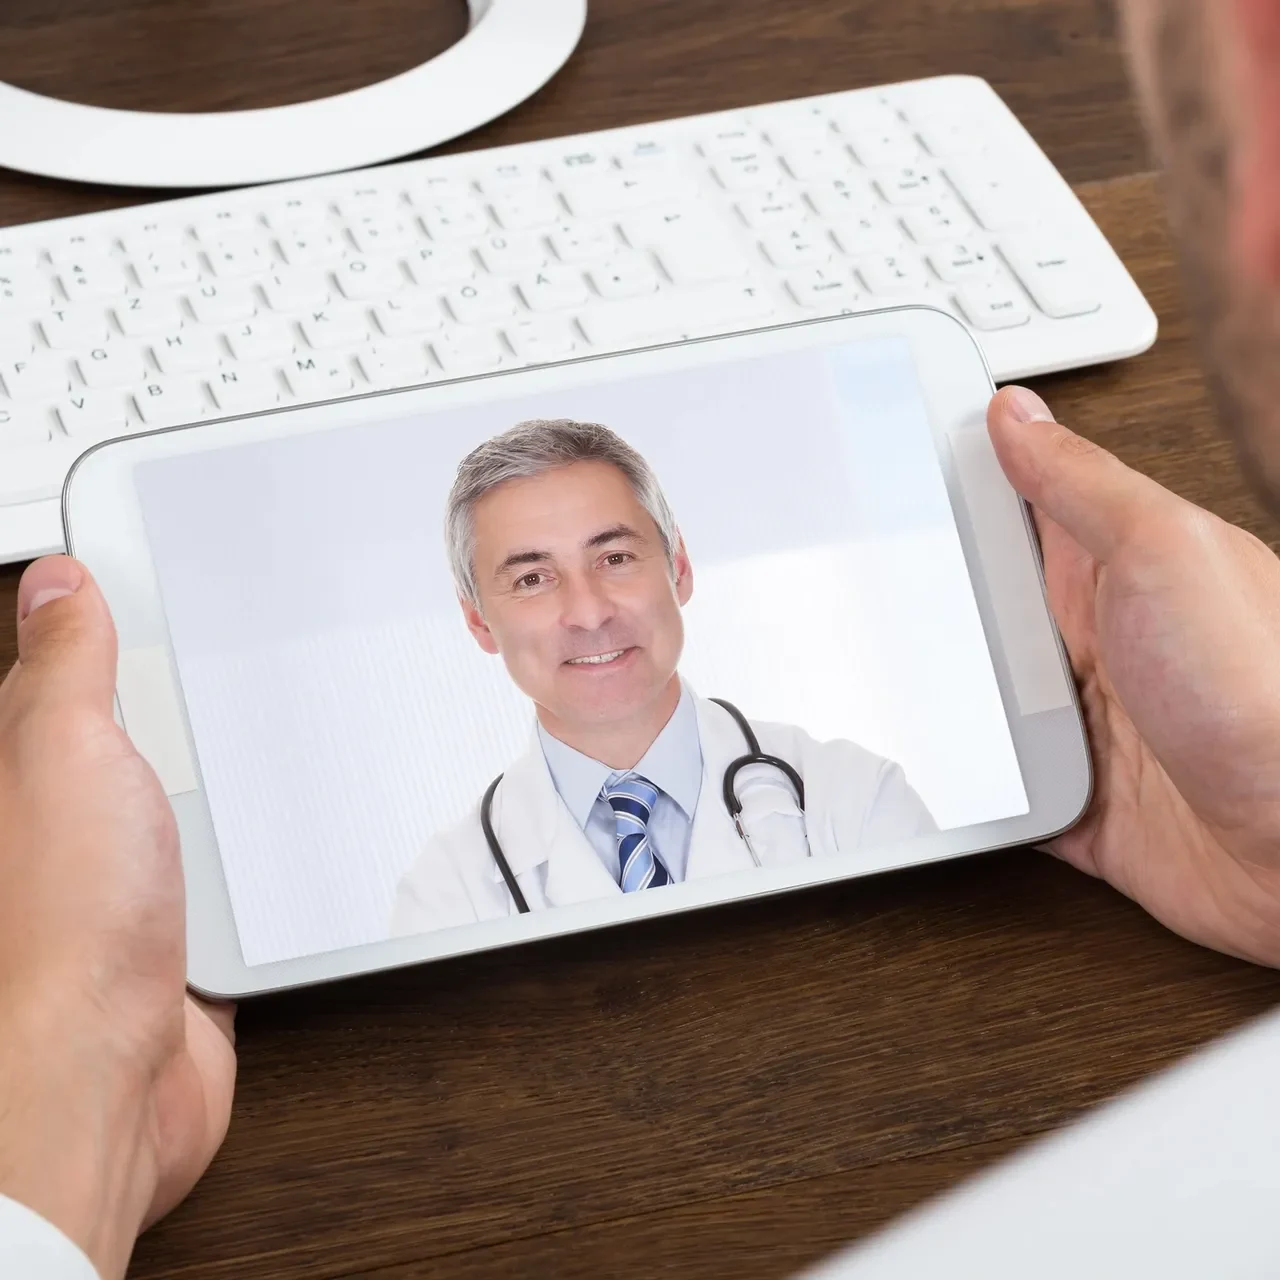 A person holding up a tablet with a picture of a doctor on it.